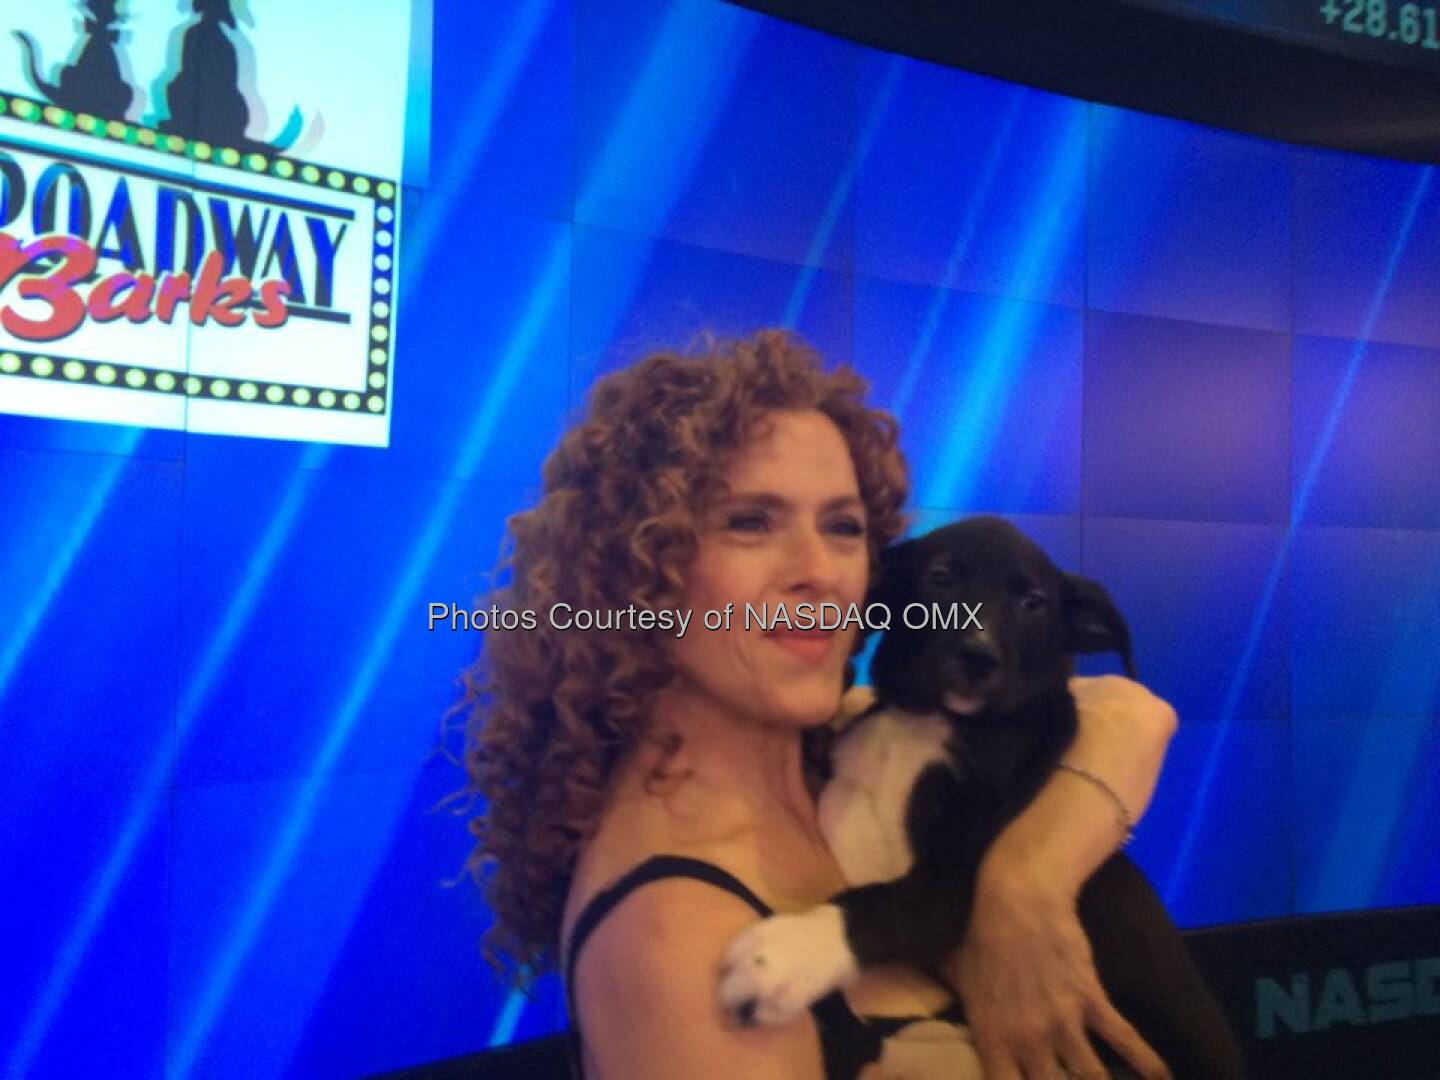 The legendary Bernadette Peters @officialBPeters with a @BroadwayBarks #Puppy at the Closing Bell! #Adopt #Broadway  Source: http://facebook.com/NASDAQ